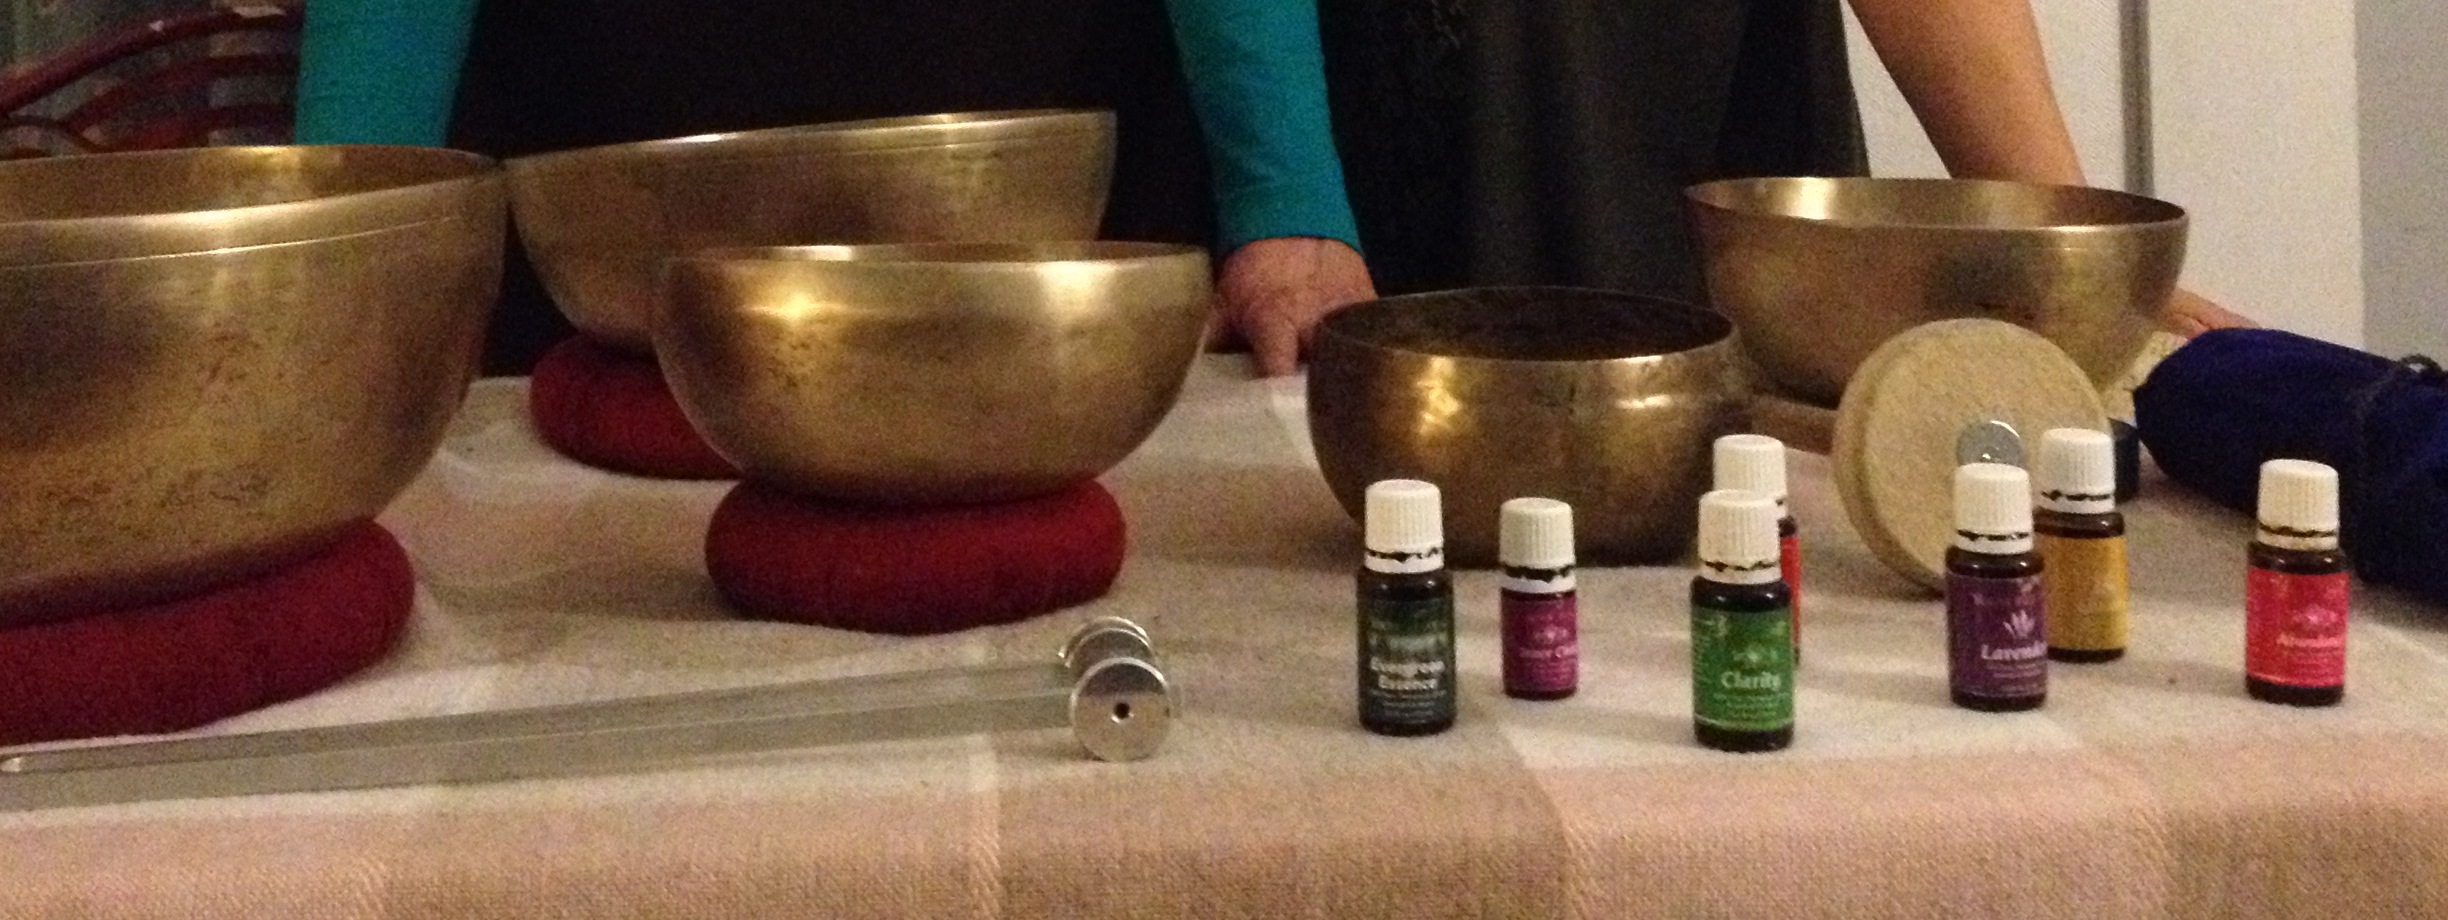 Tibetan bowls, weighted tuning fork, Young Living essential oils used in our workshop.